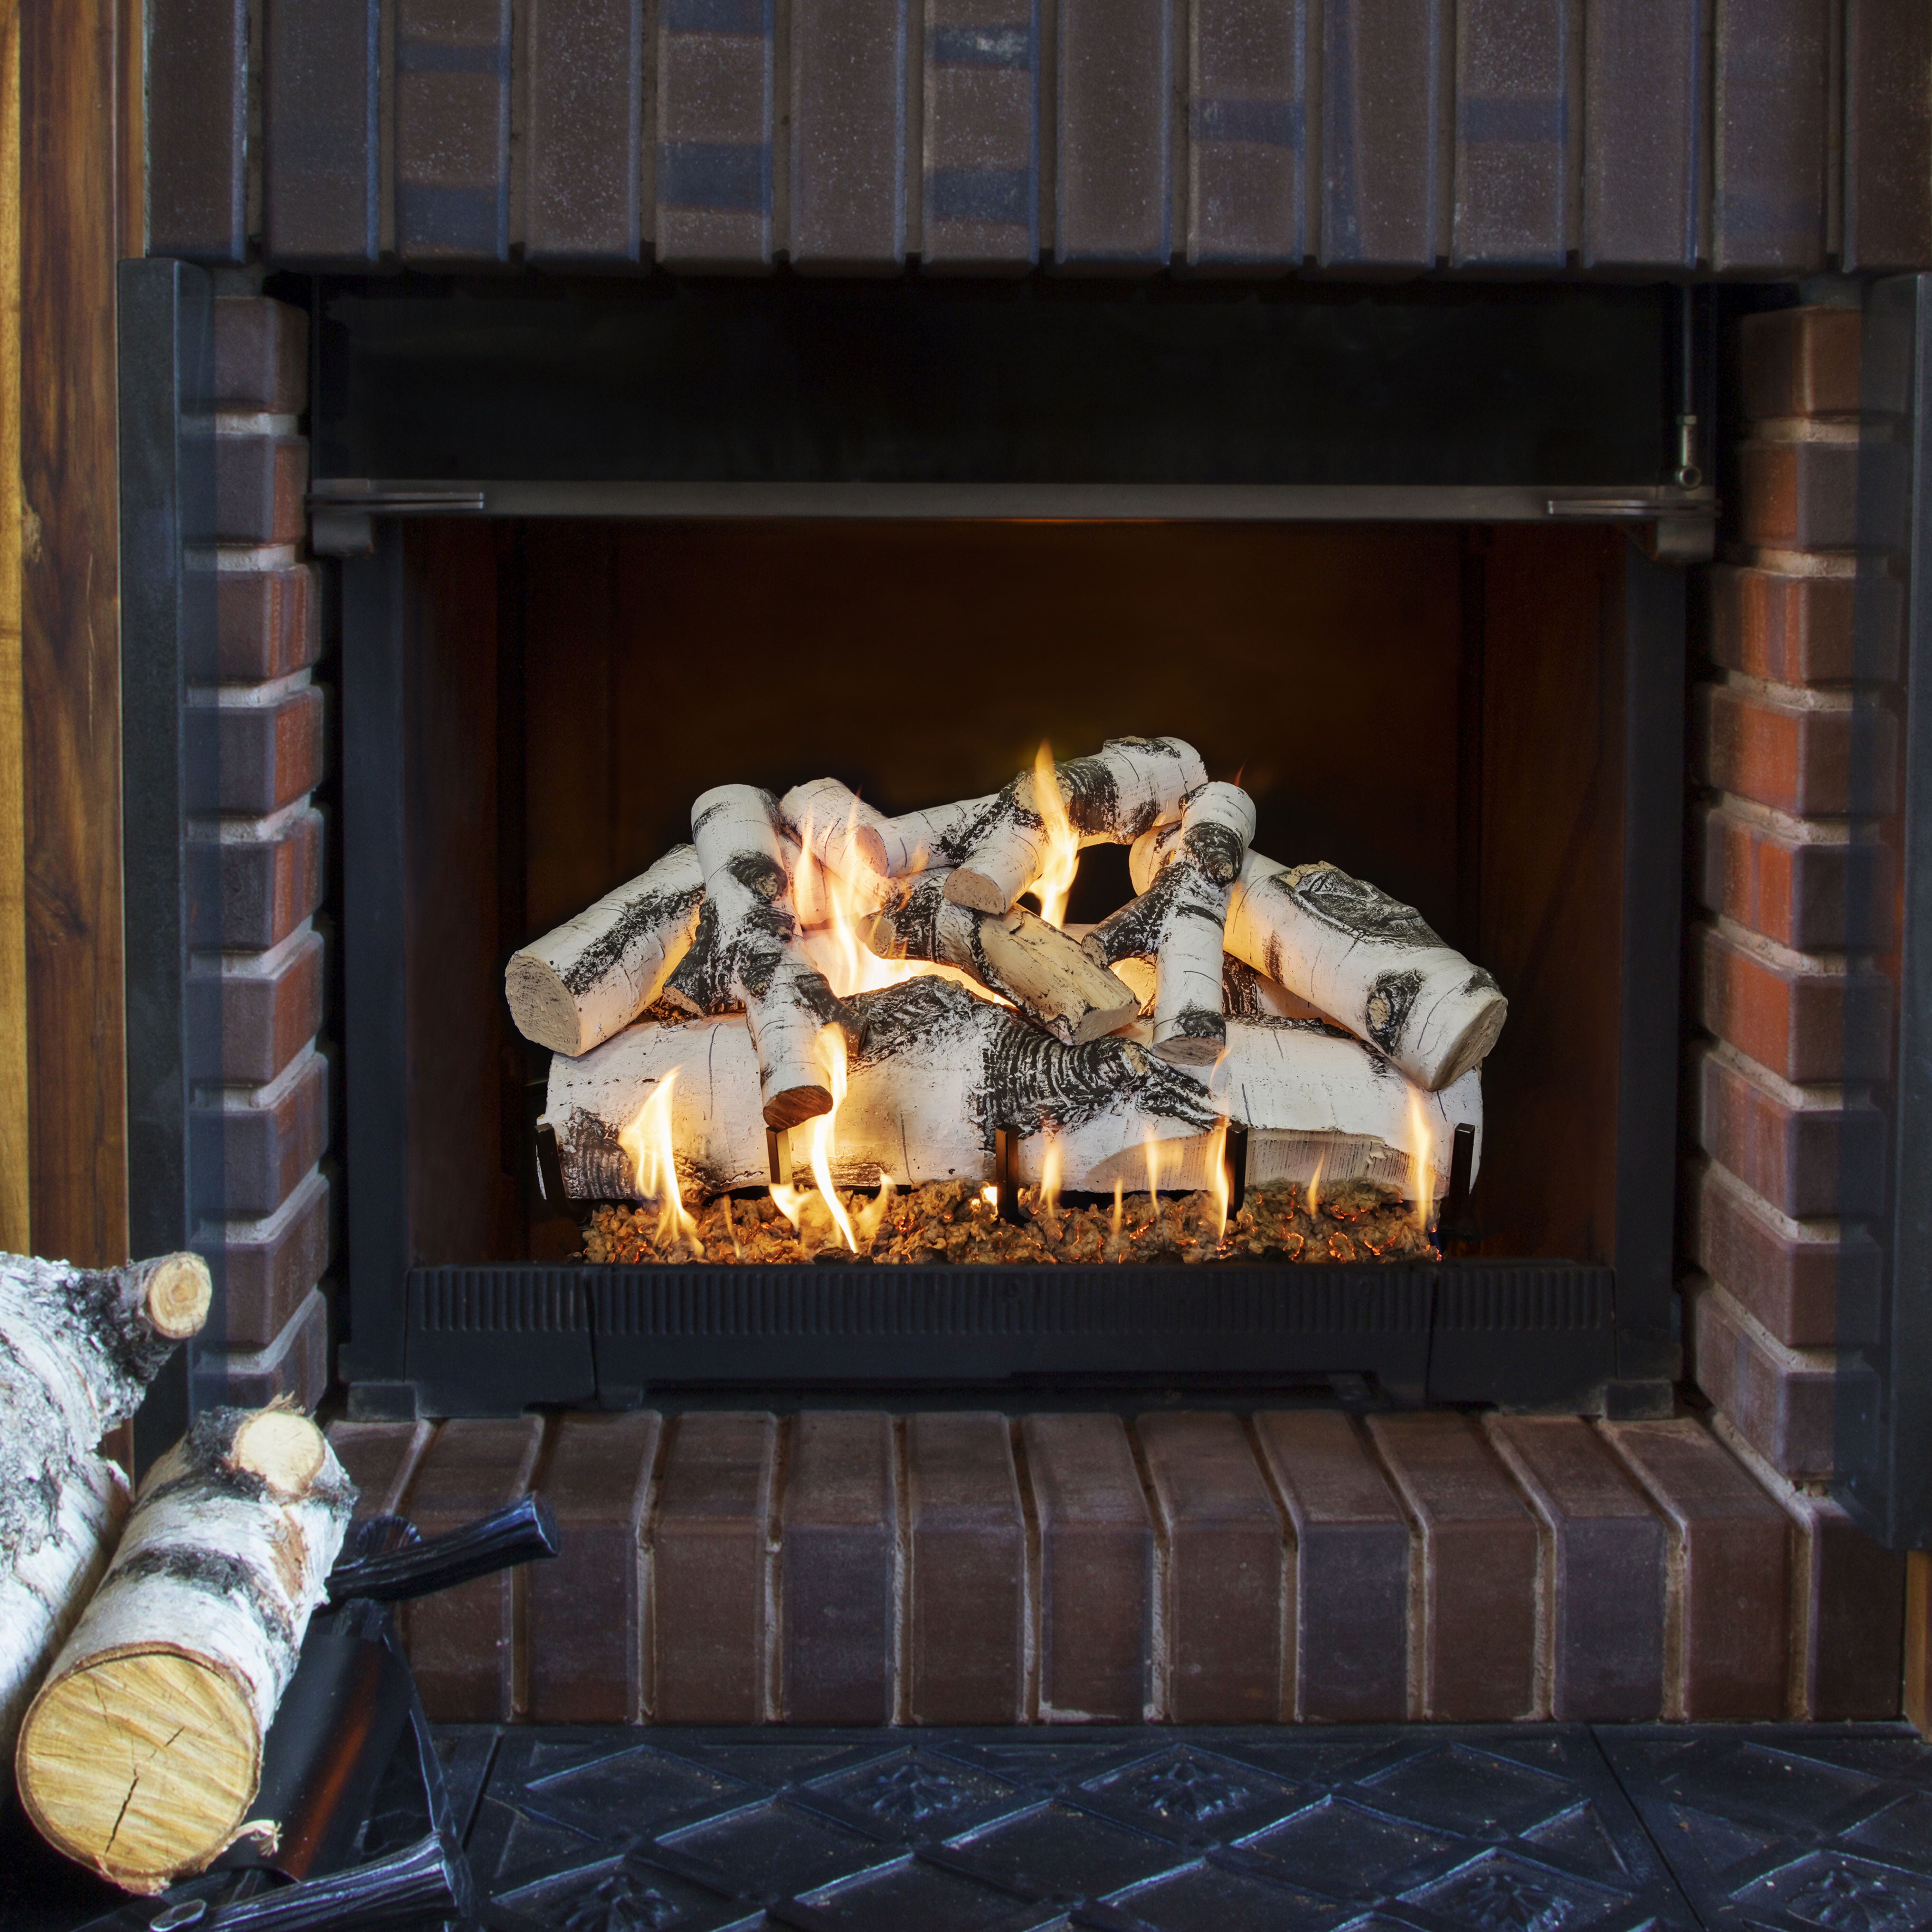 The Grand Canyon Quaking Aspen Gas Log Set is cast from real wood found across the American countryside and finished with a detailed, white Birch finish marked with signature black scars